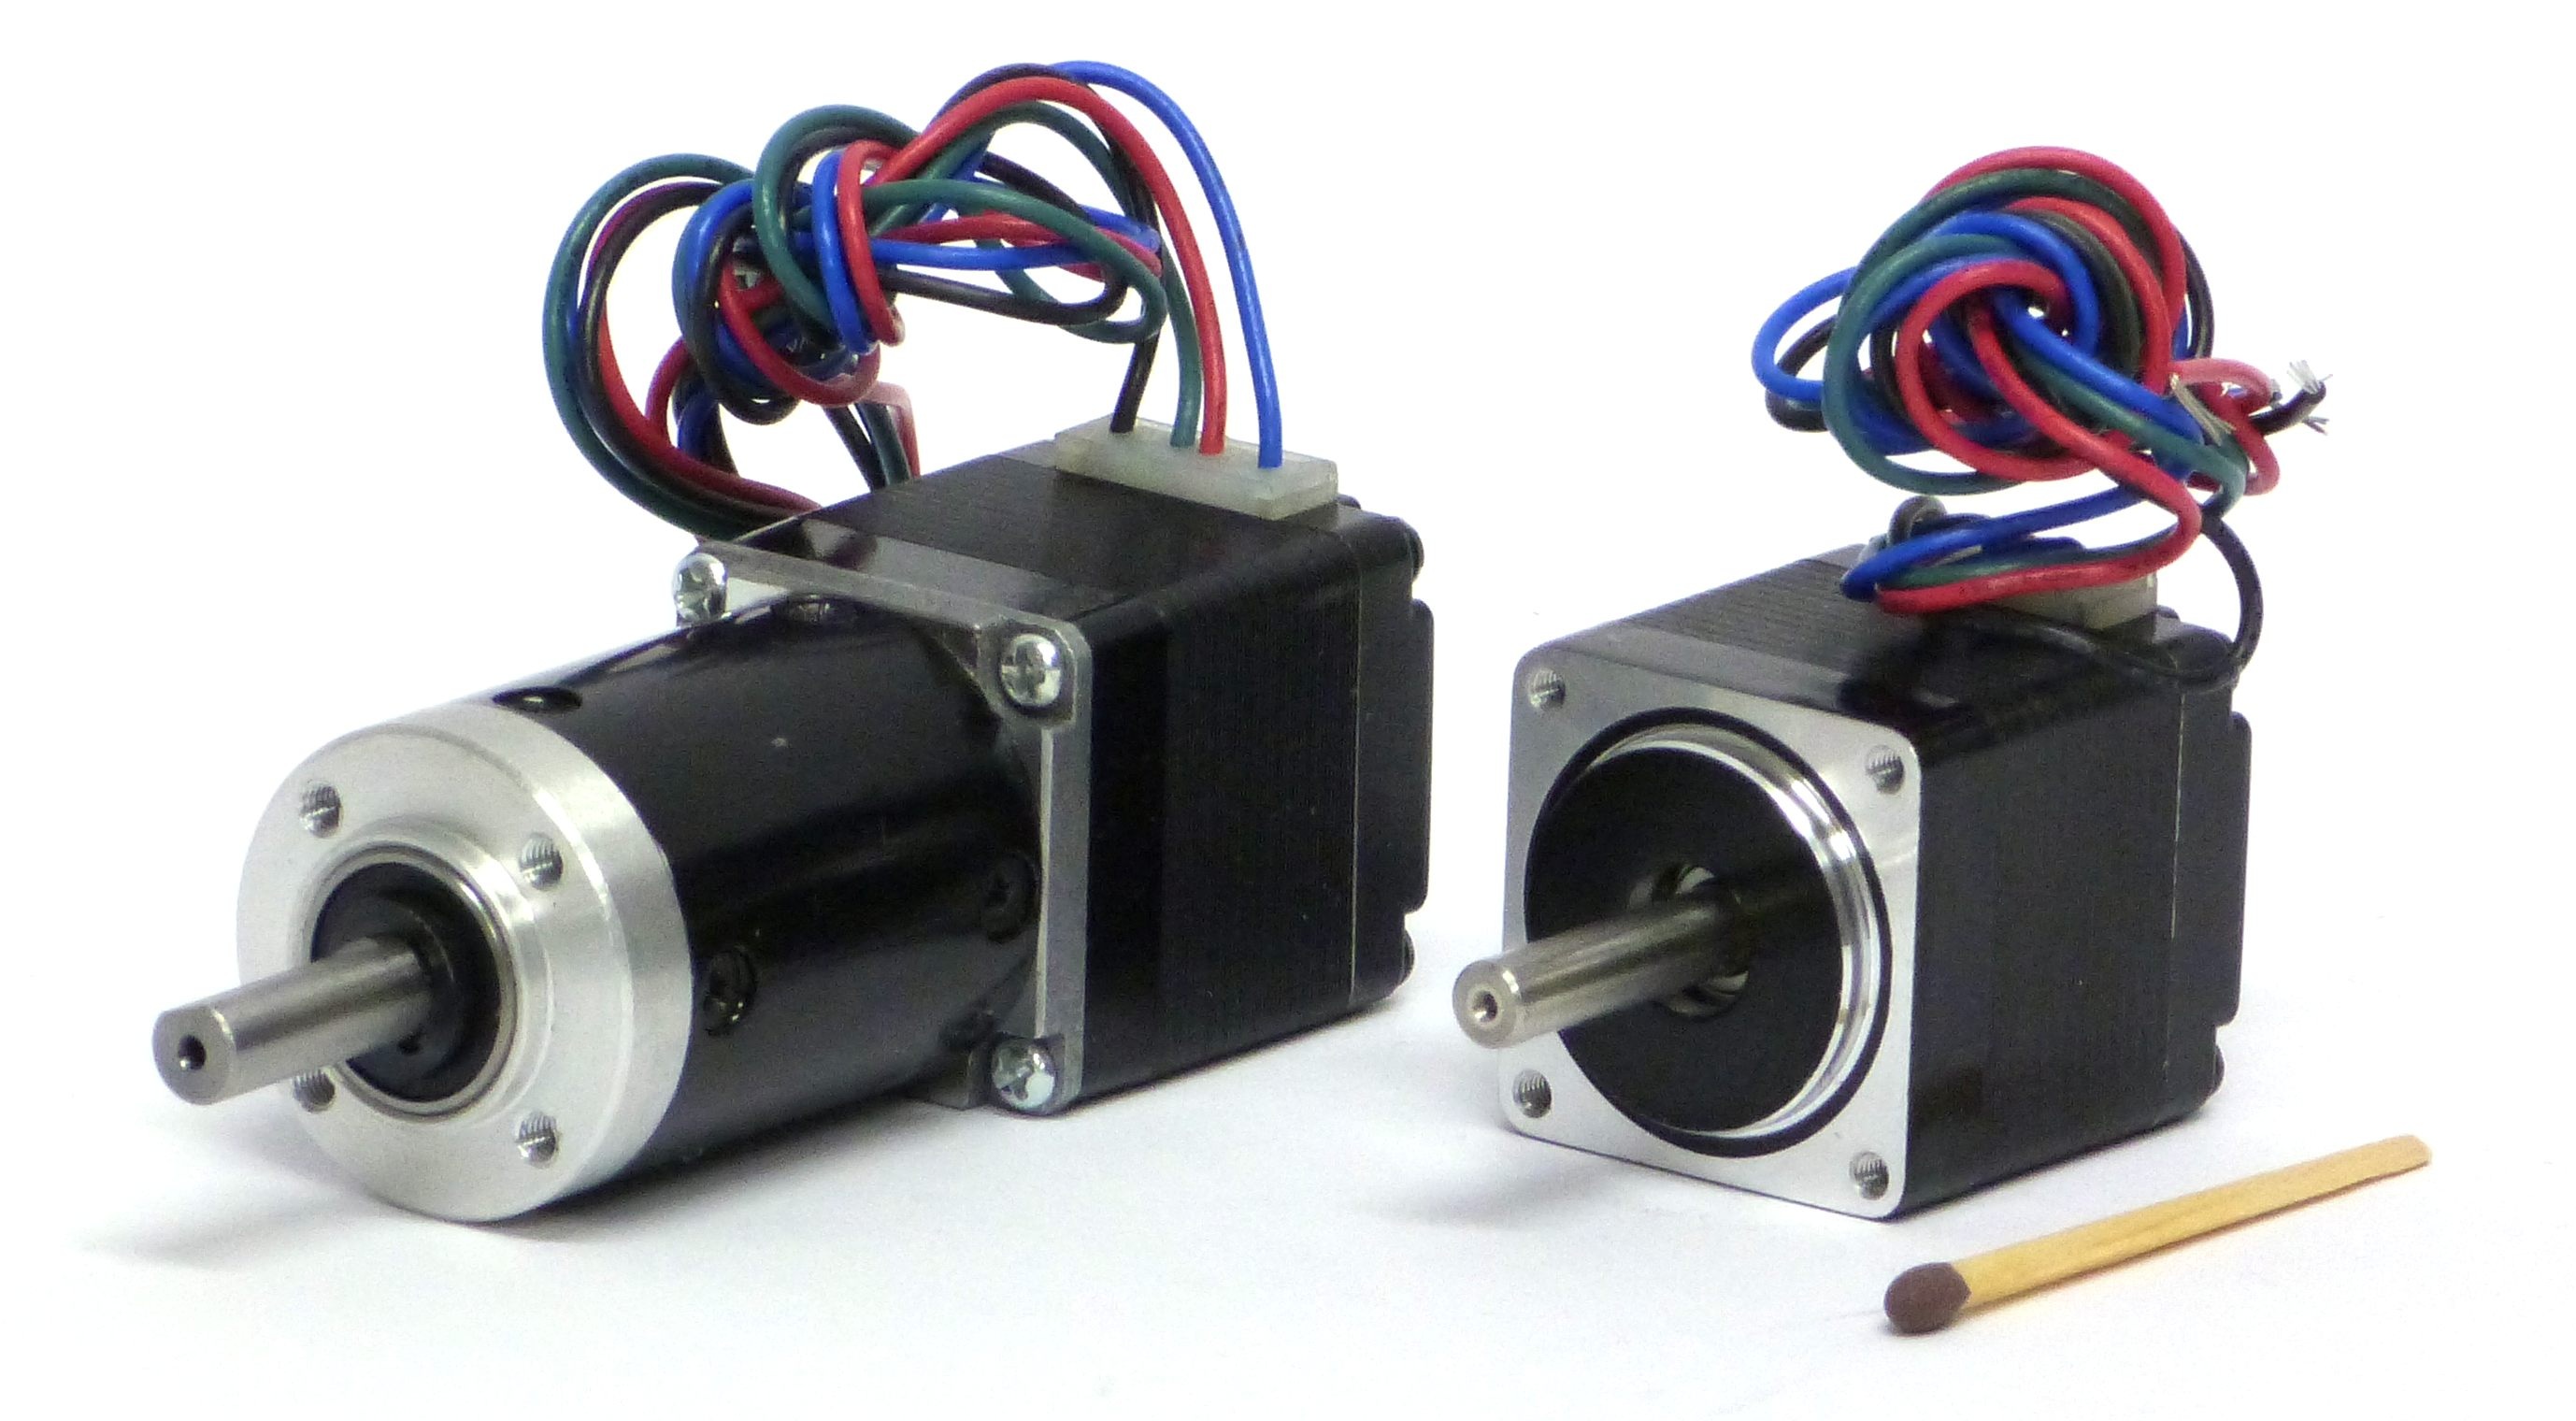 Perfect example of how small a mini stepper motor from JVL is! a real miniature stepper motor.